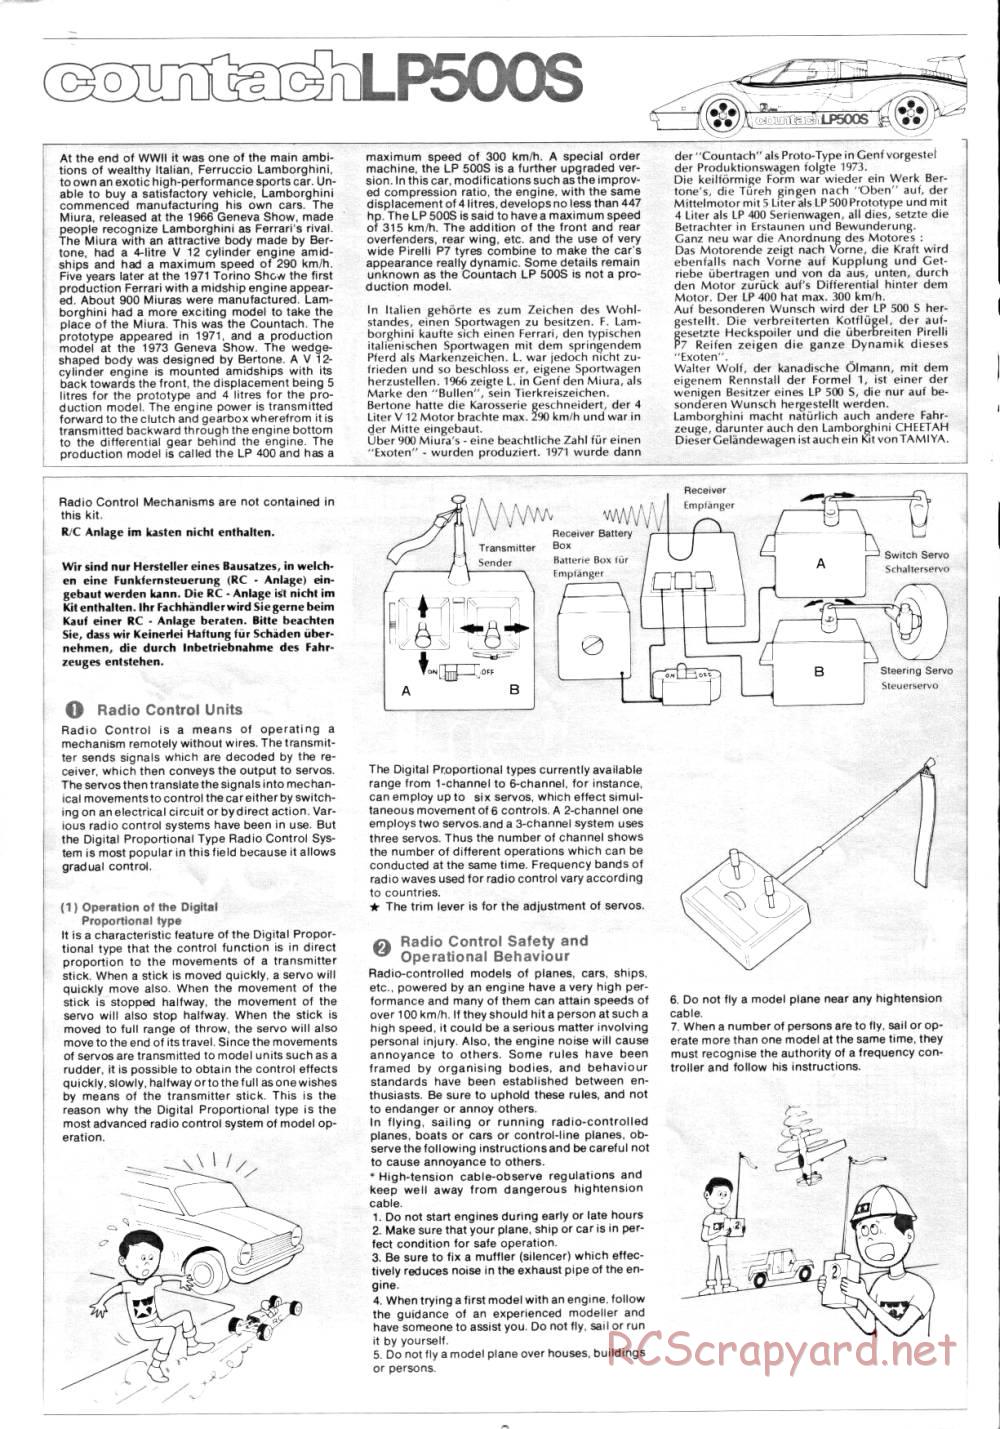 Tamiya - Lmbrghni Countach LP500S - 58005 - Manual - Page 2